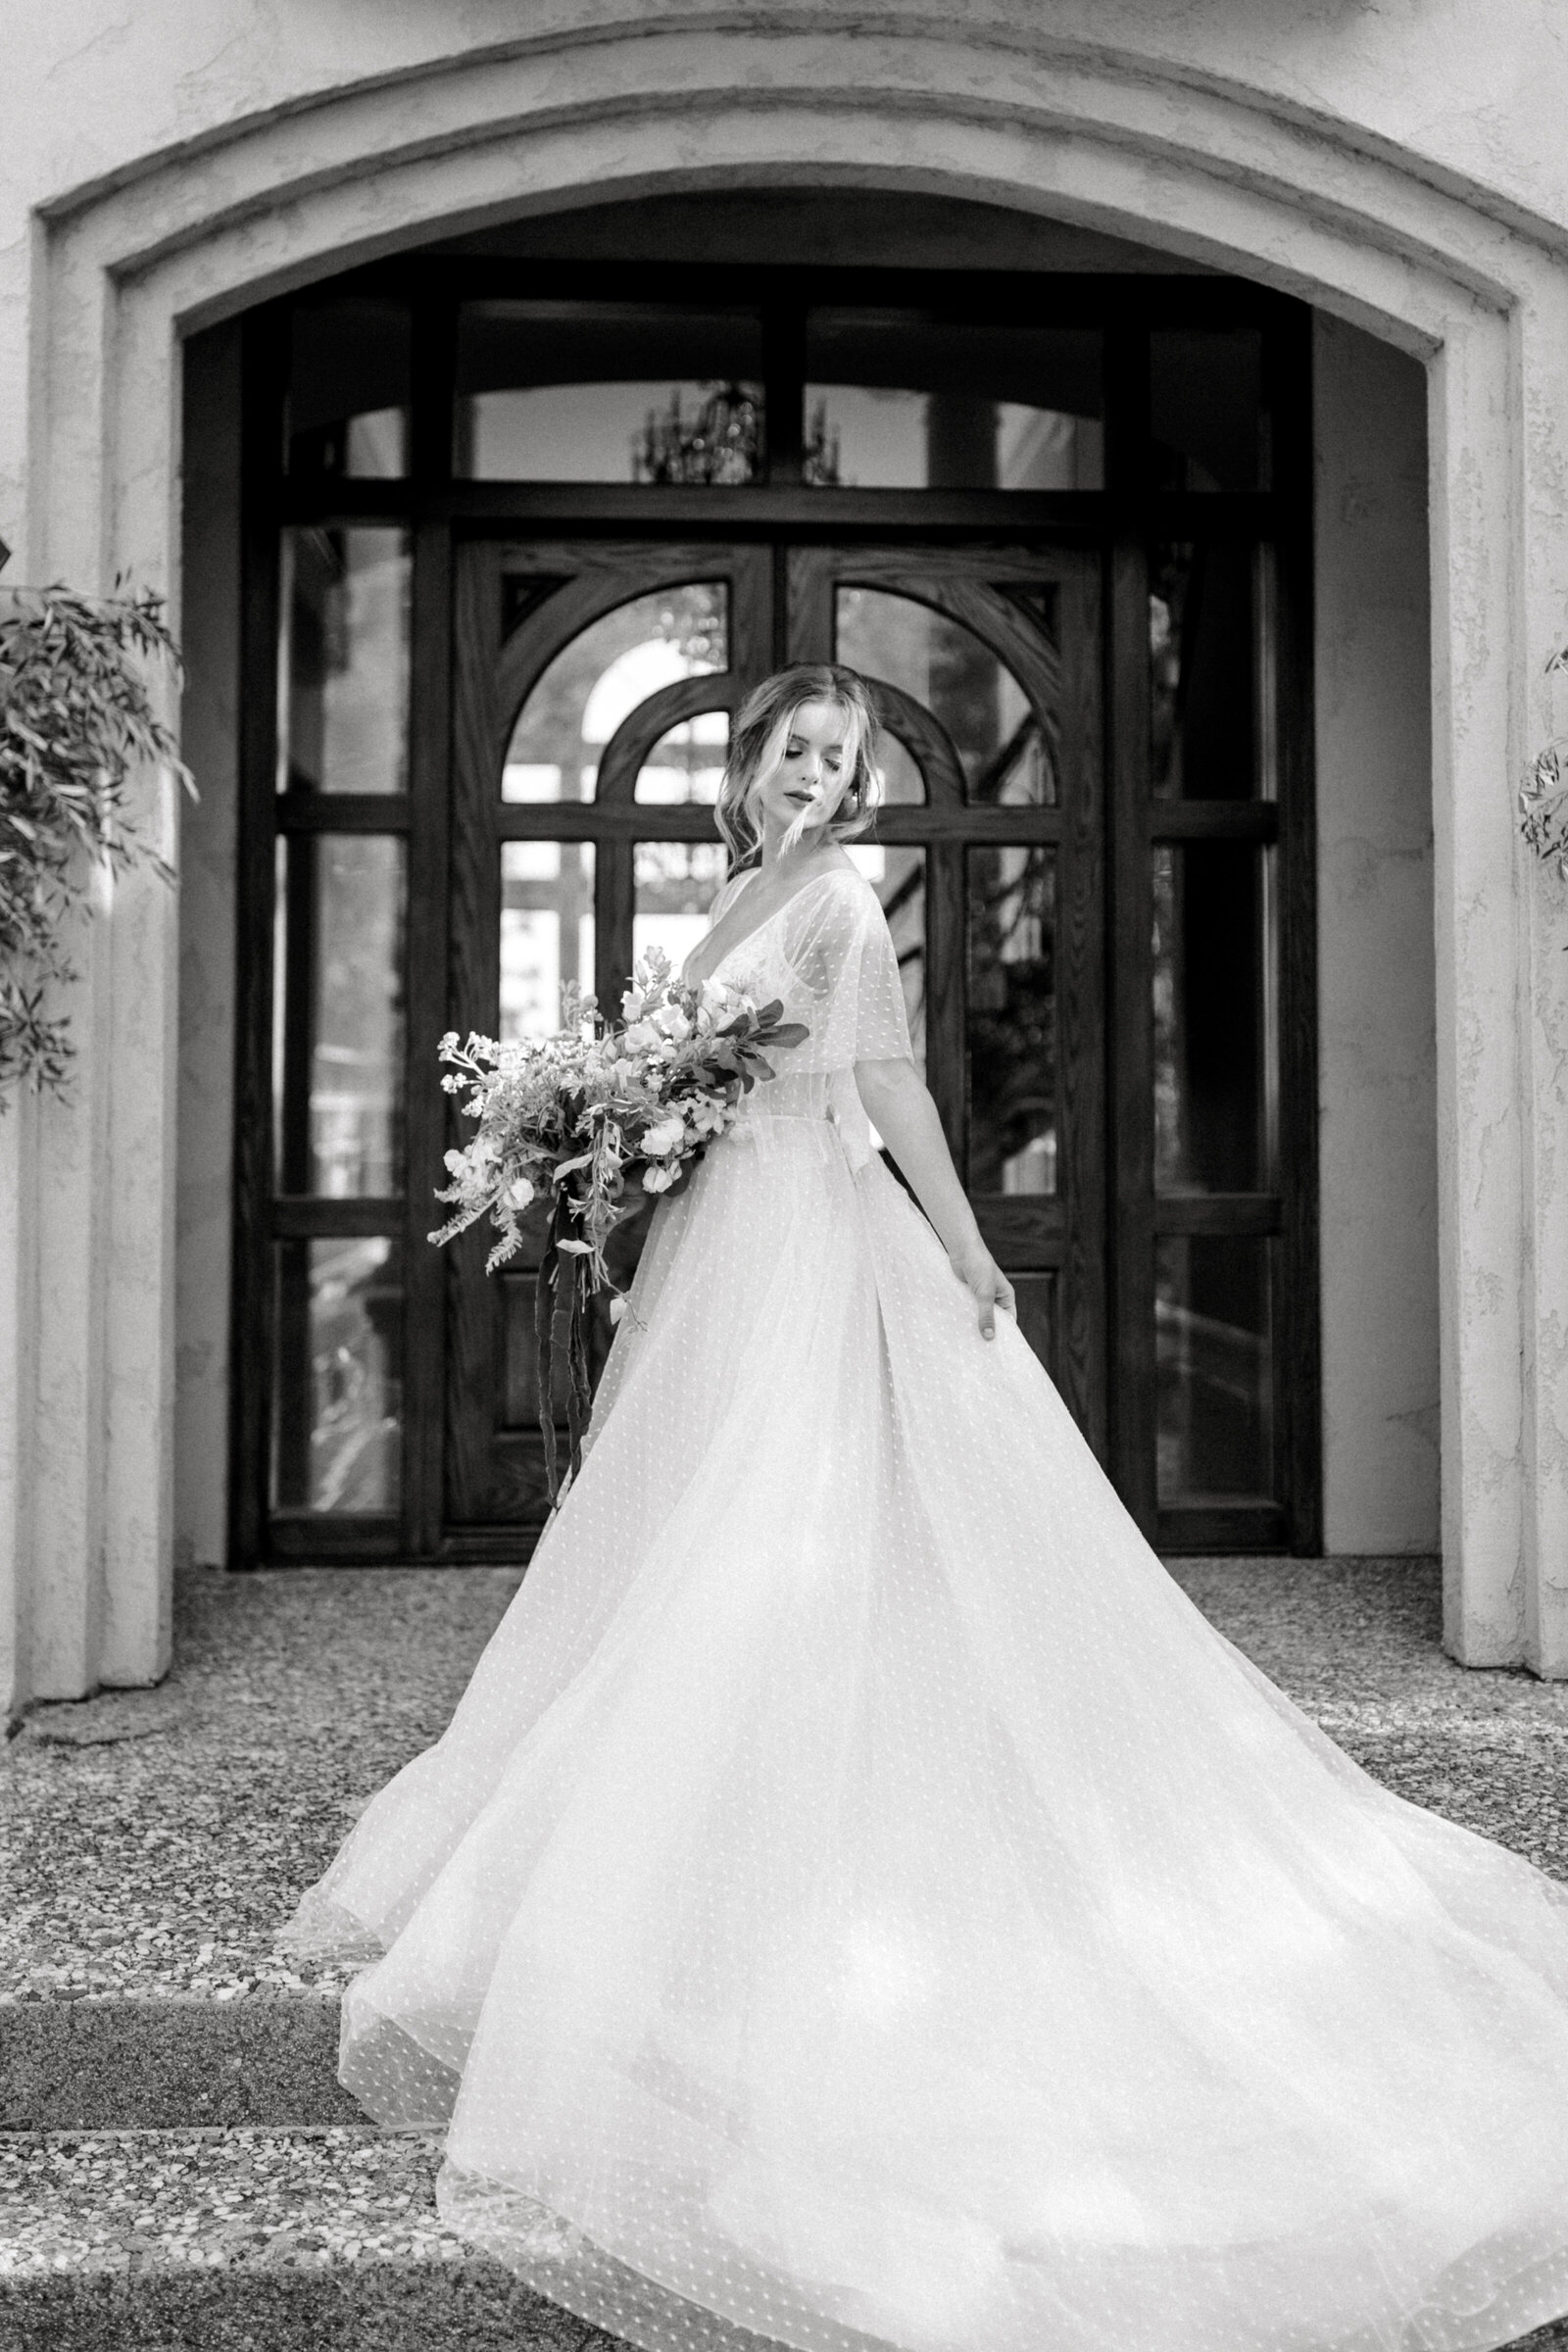 Bride on her wedding day at Filoli in Woodside, CA